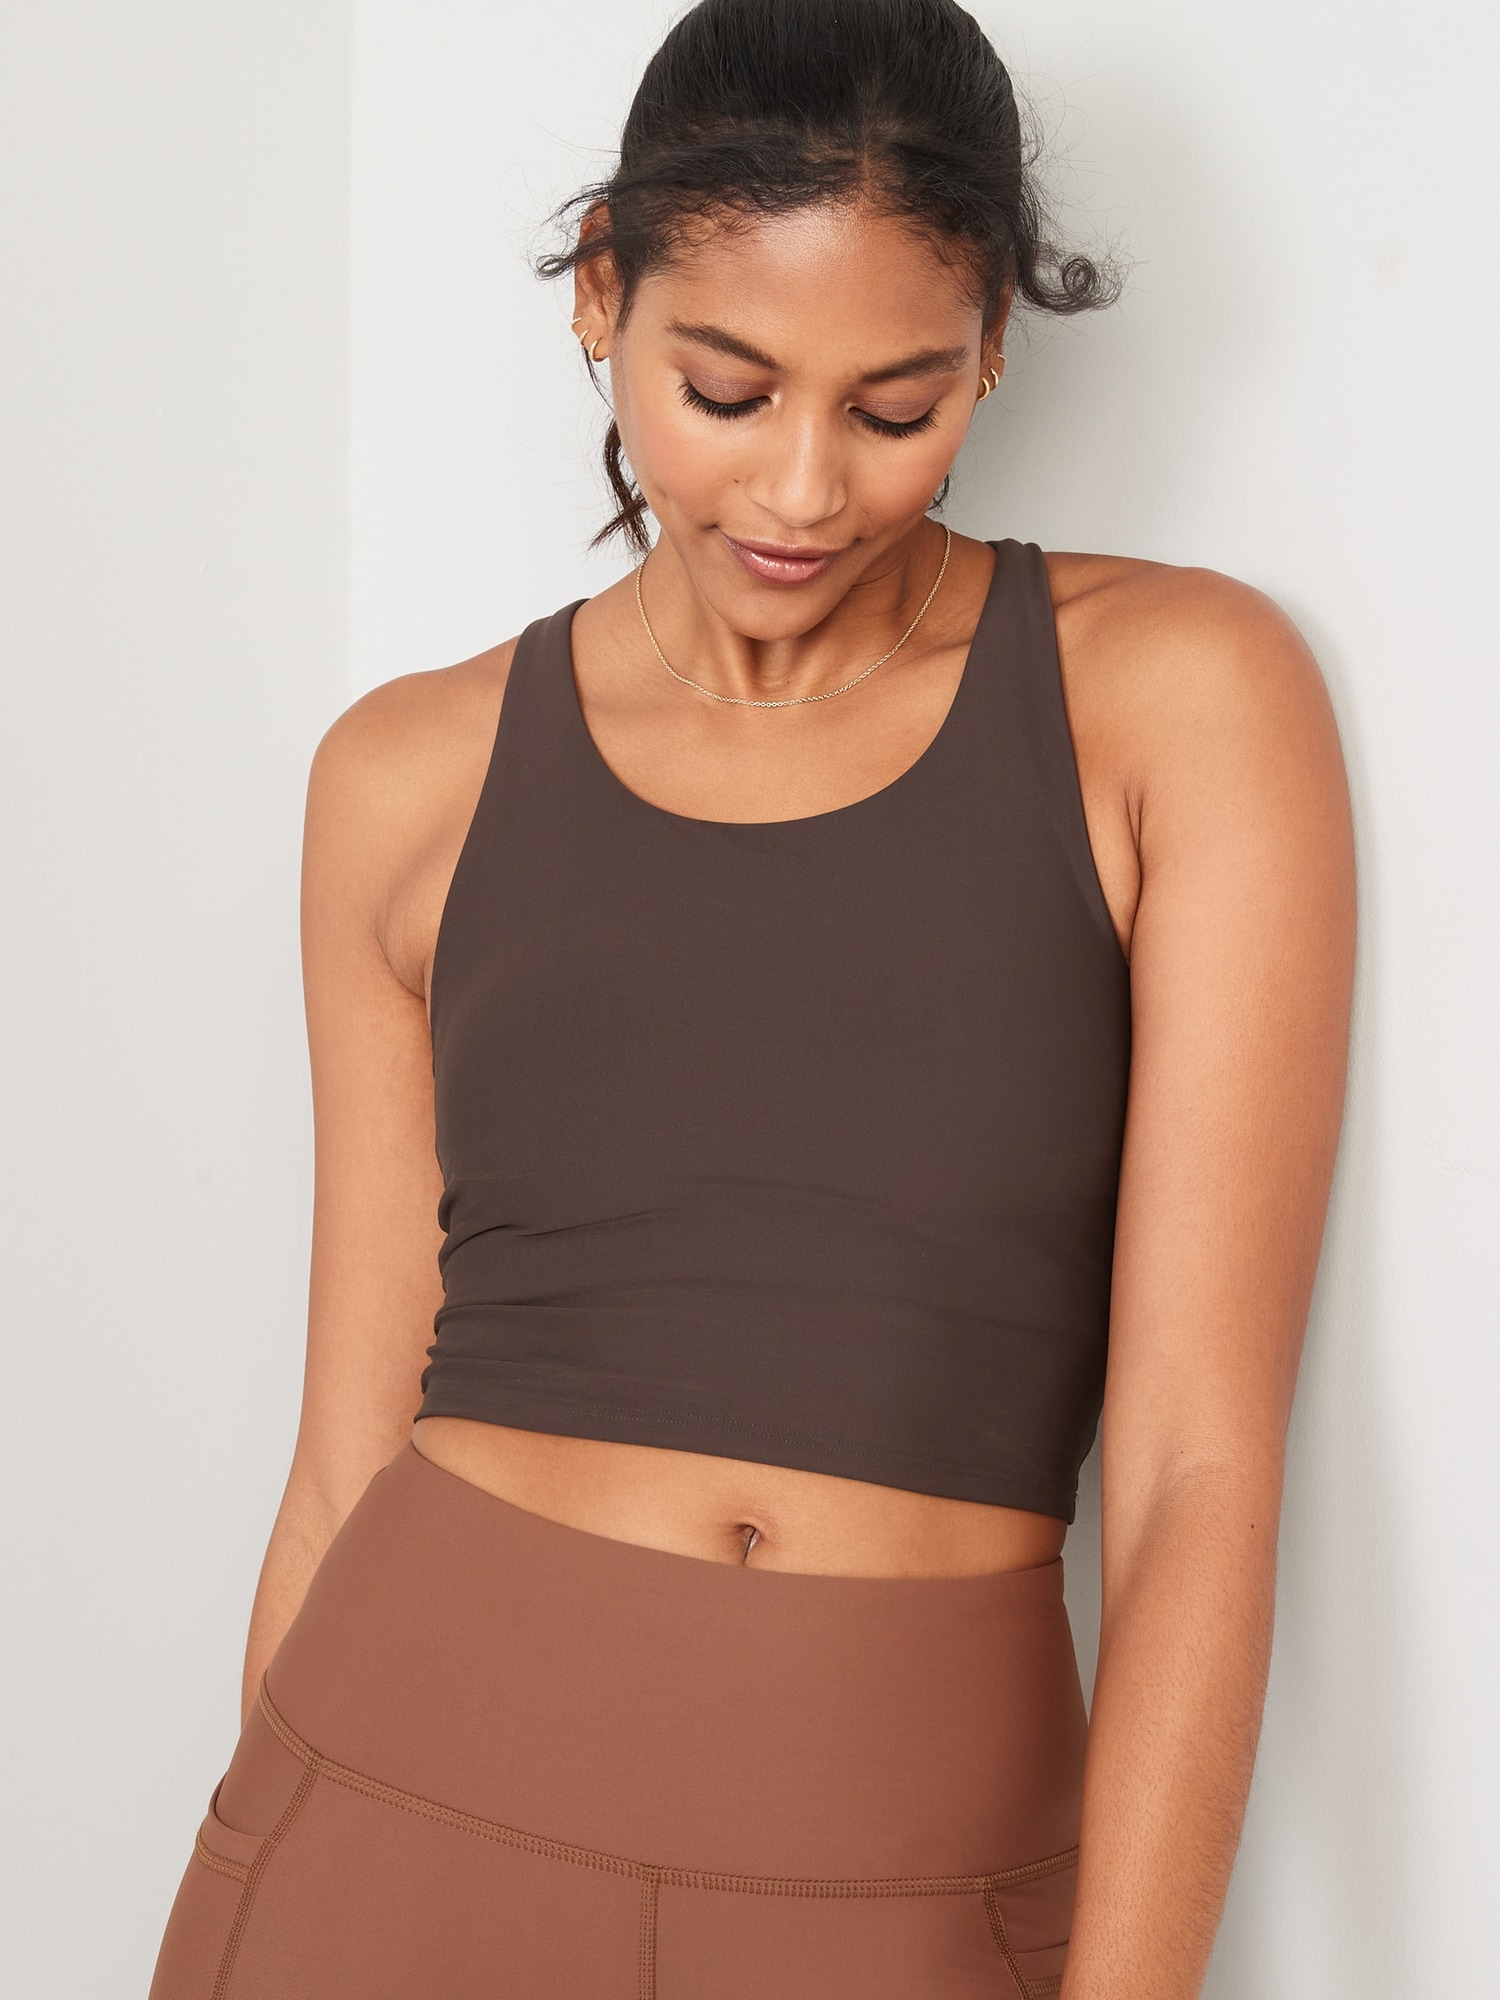 Old Navy Light Support PowerSoft Adjustable Longline Sports Bra for Women brown. 1